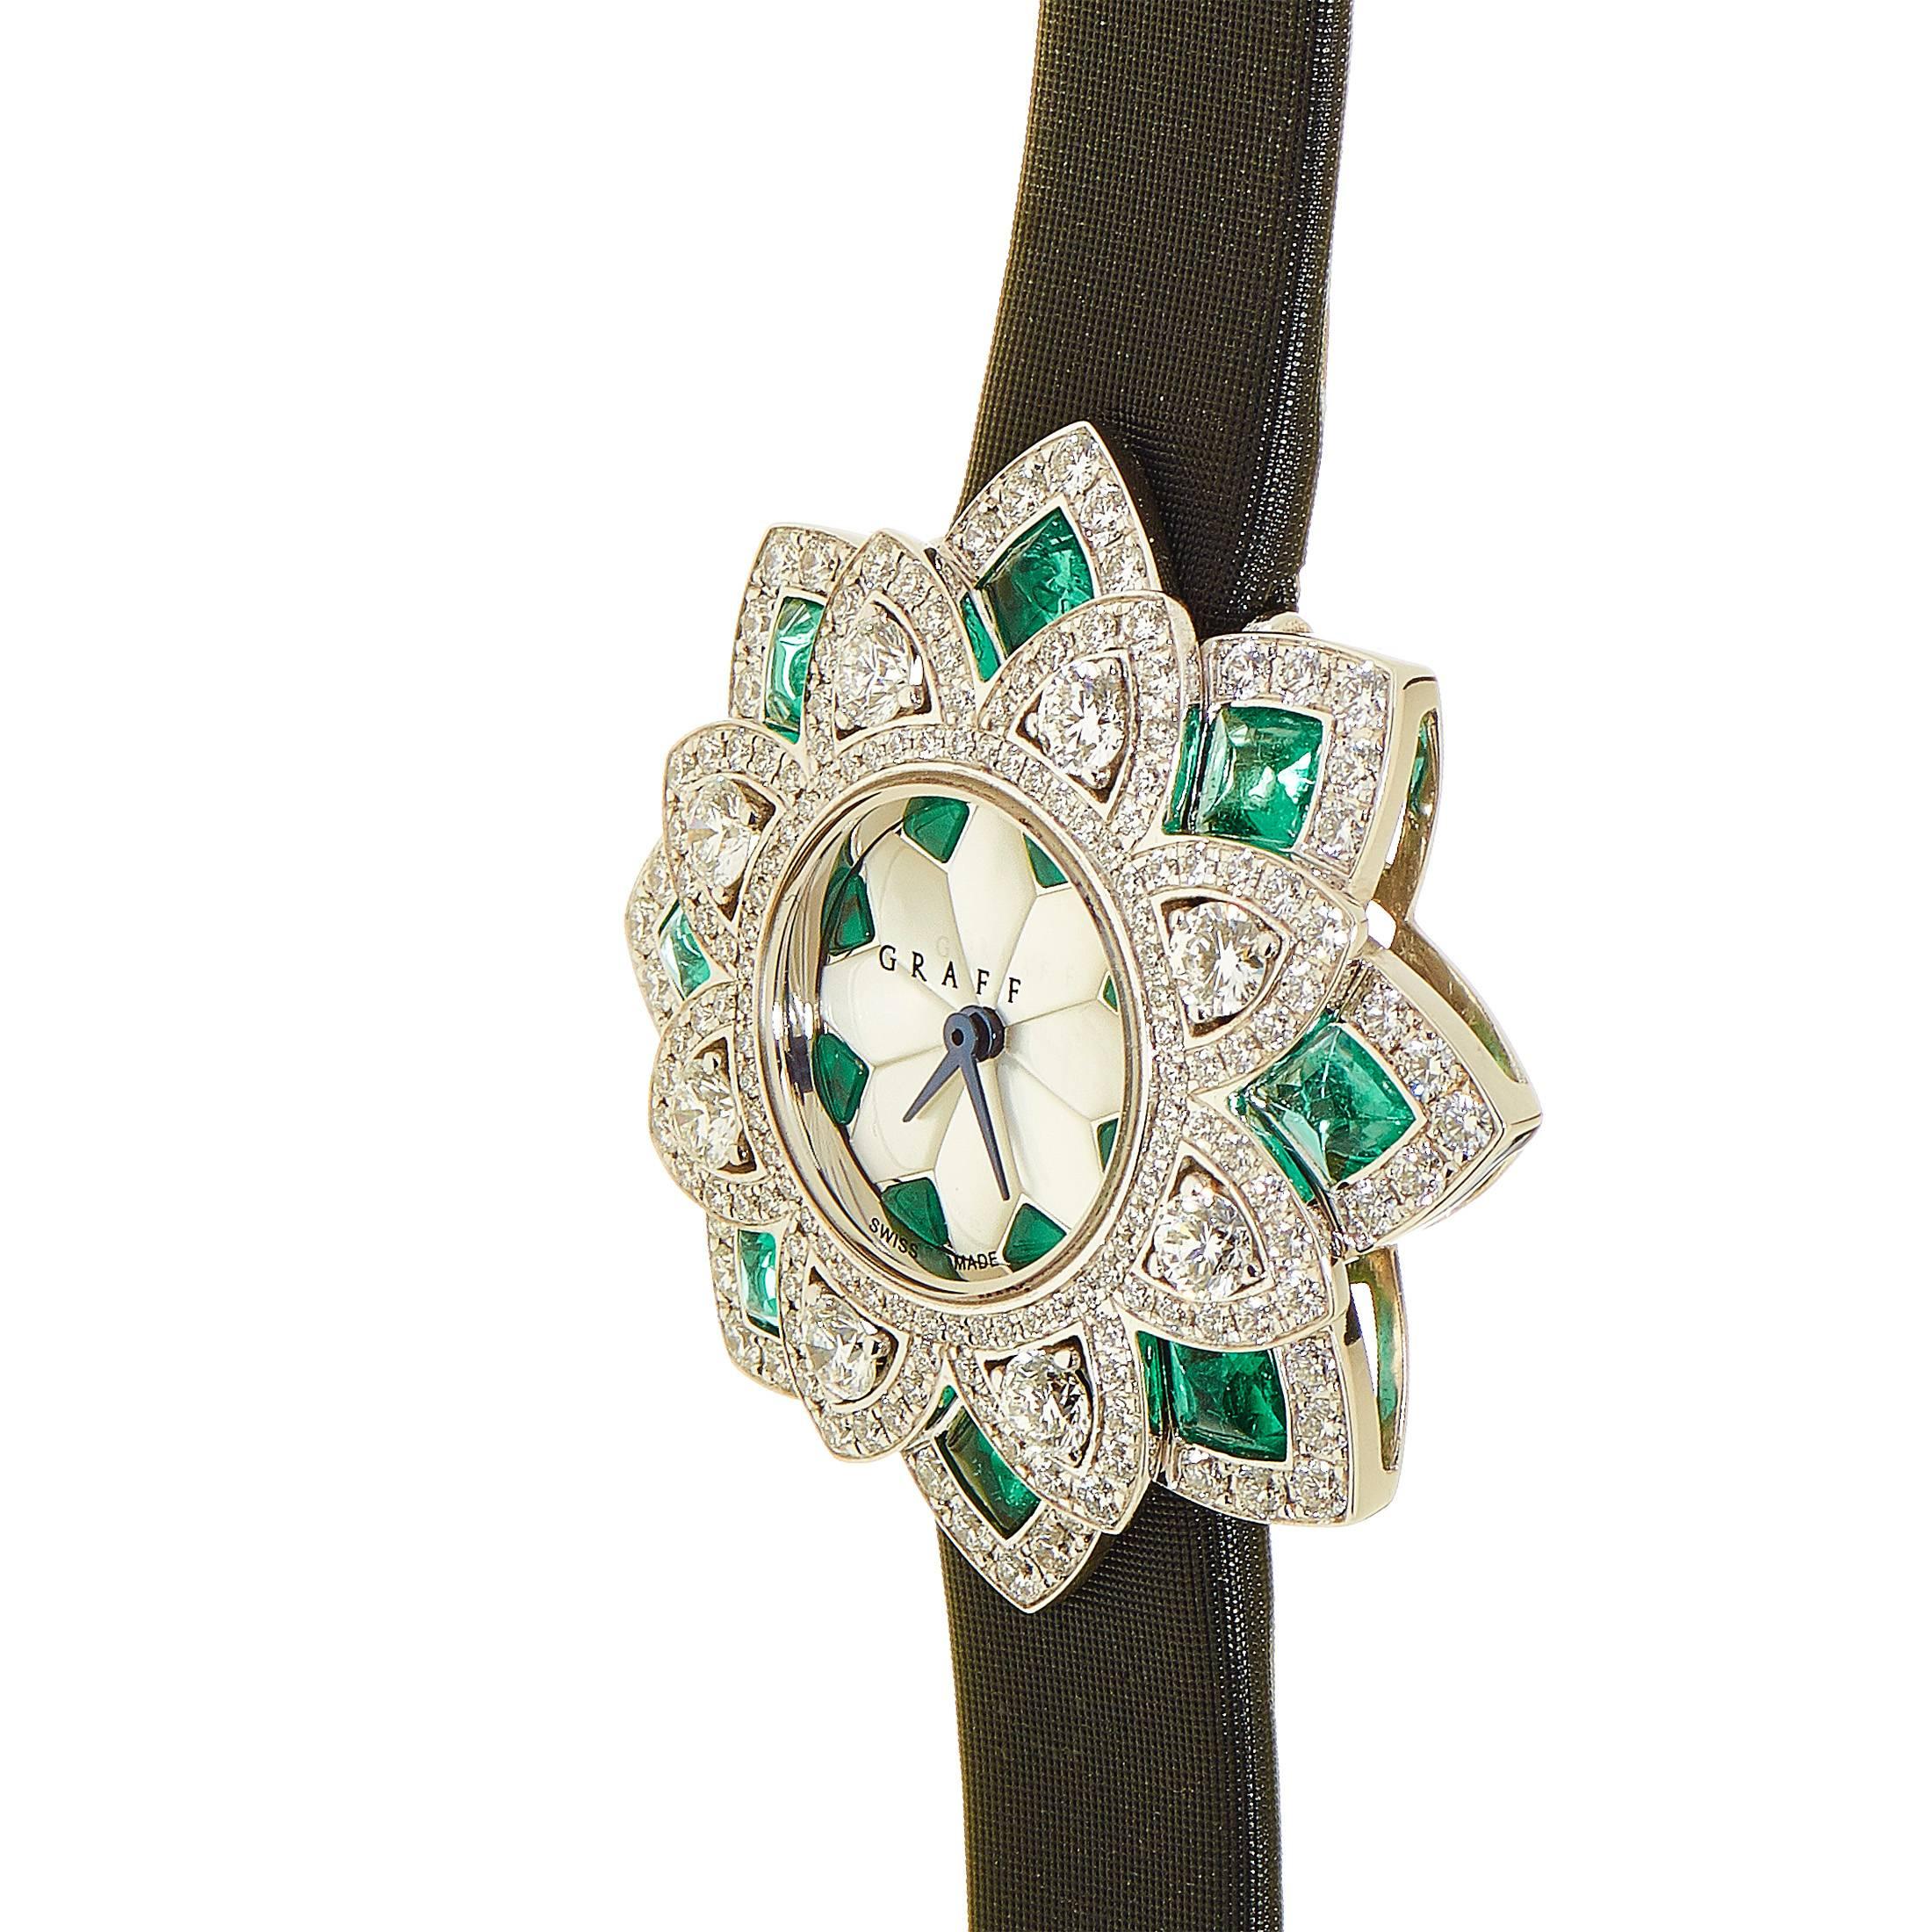 A total of 120 diamonds adorns the spellbinding shape of the 18K white gold case, creating a mesmerizing and memorable image in combination with 17 striking emeralds amounting to 2.76 carats. Ensuring excellent legibility by indicating hours and